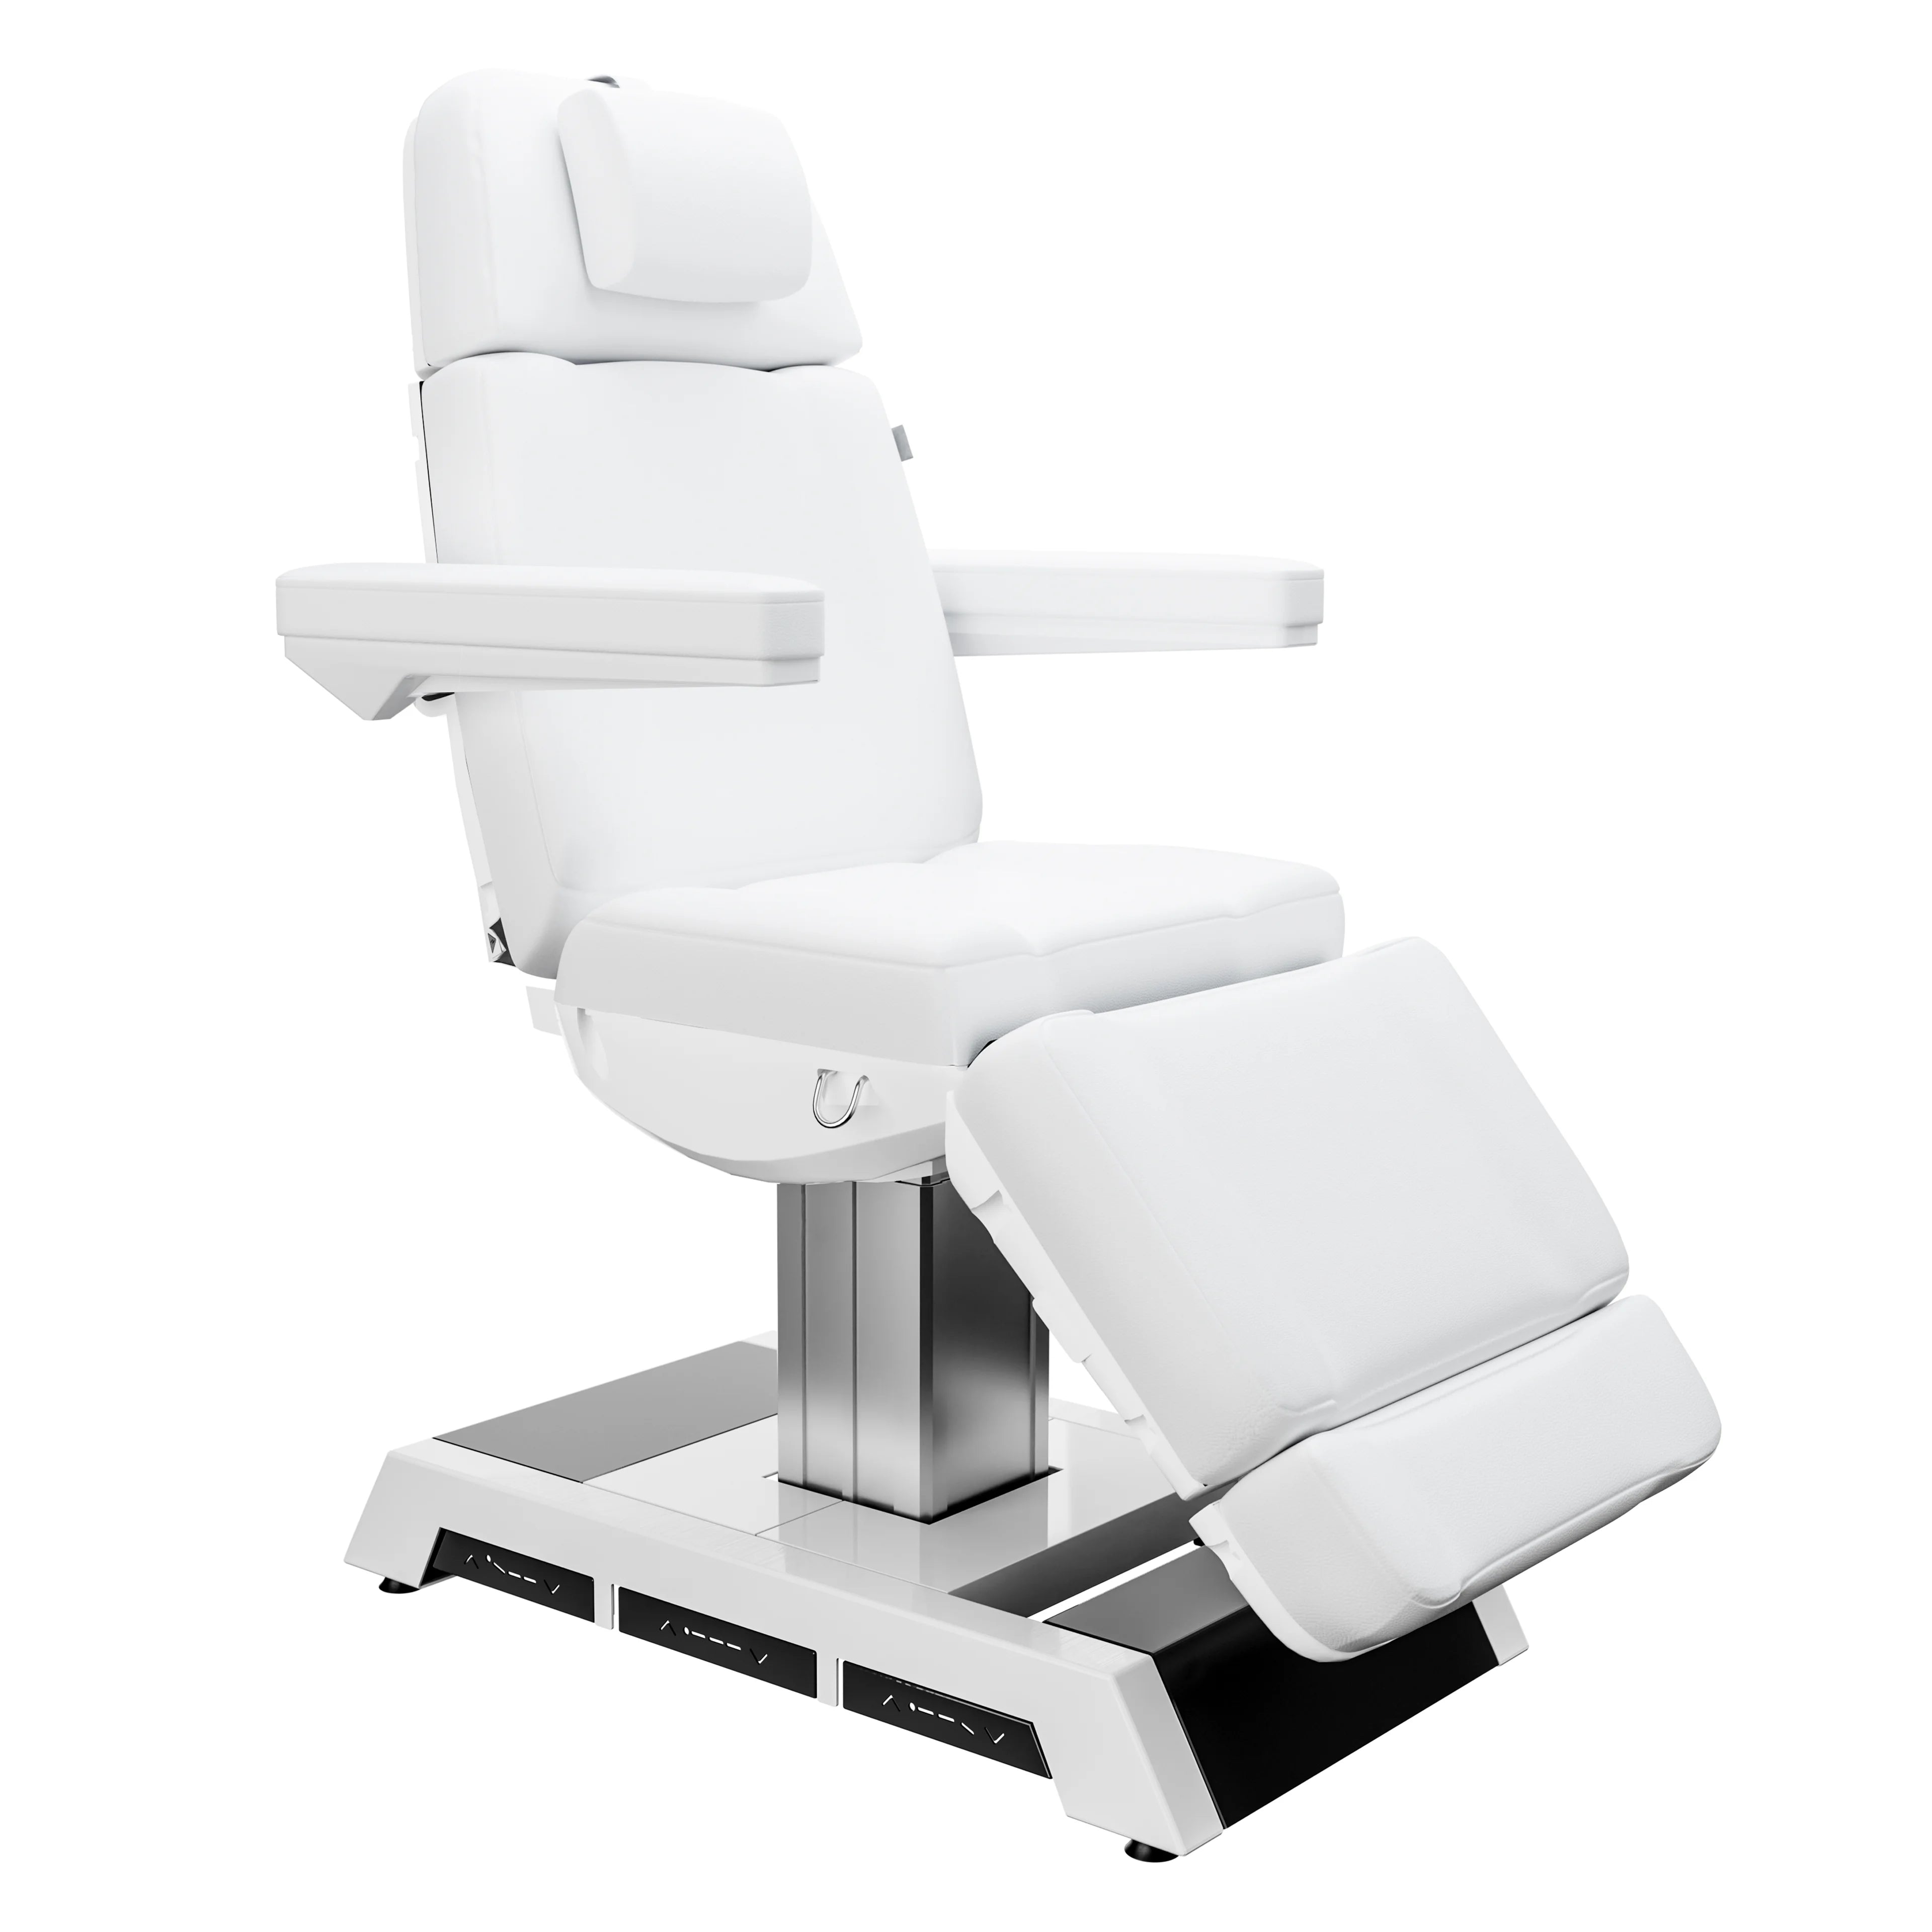 SpaMarc . Adones (White) . 4 Motor Spa Treatment Chair/Bed